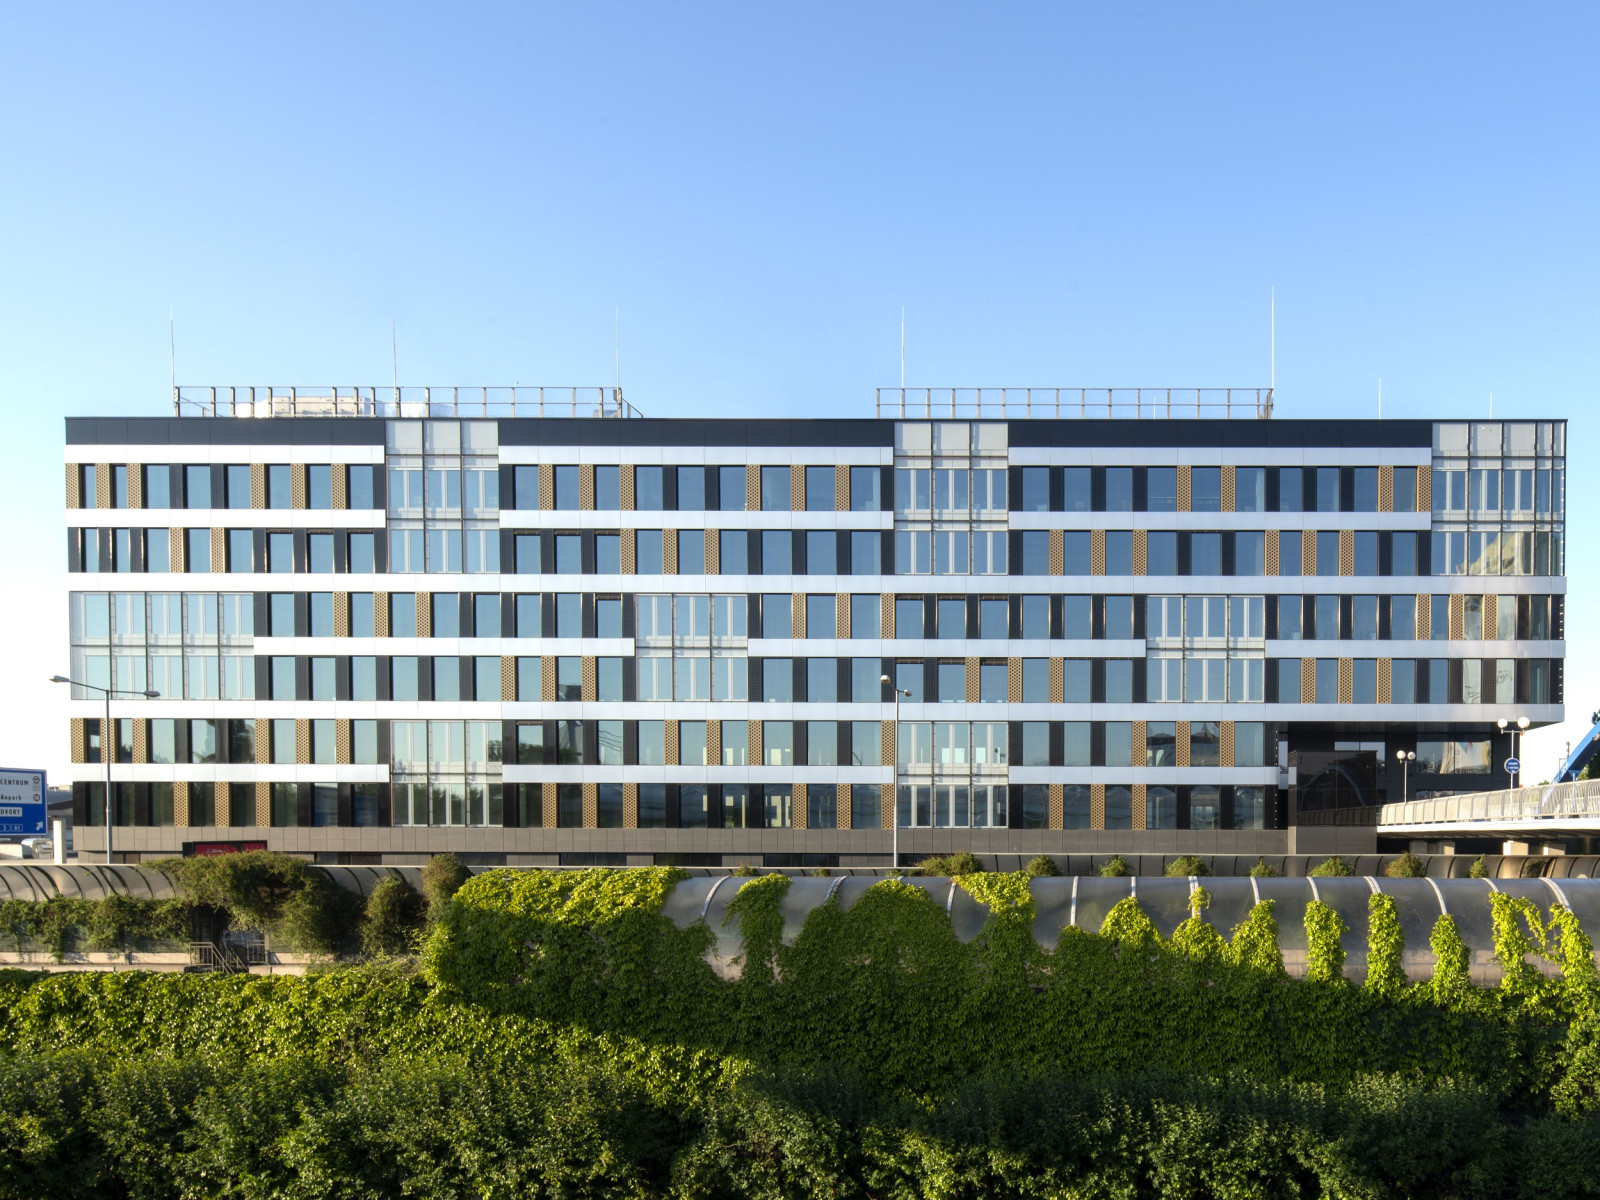 Why is Einpark Offices the greenest building in Slovakia